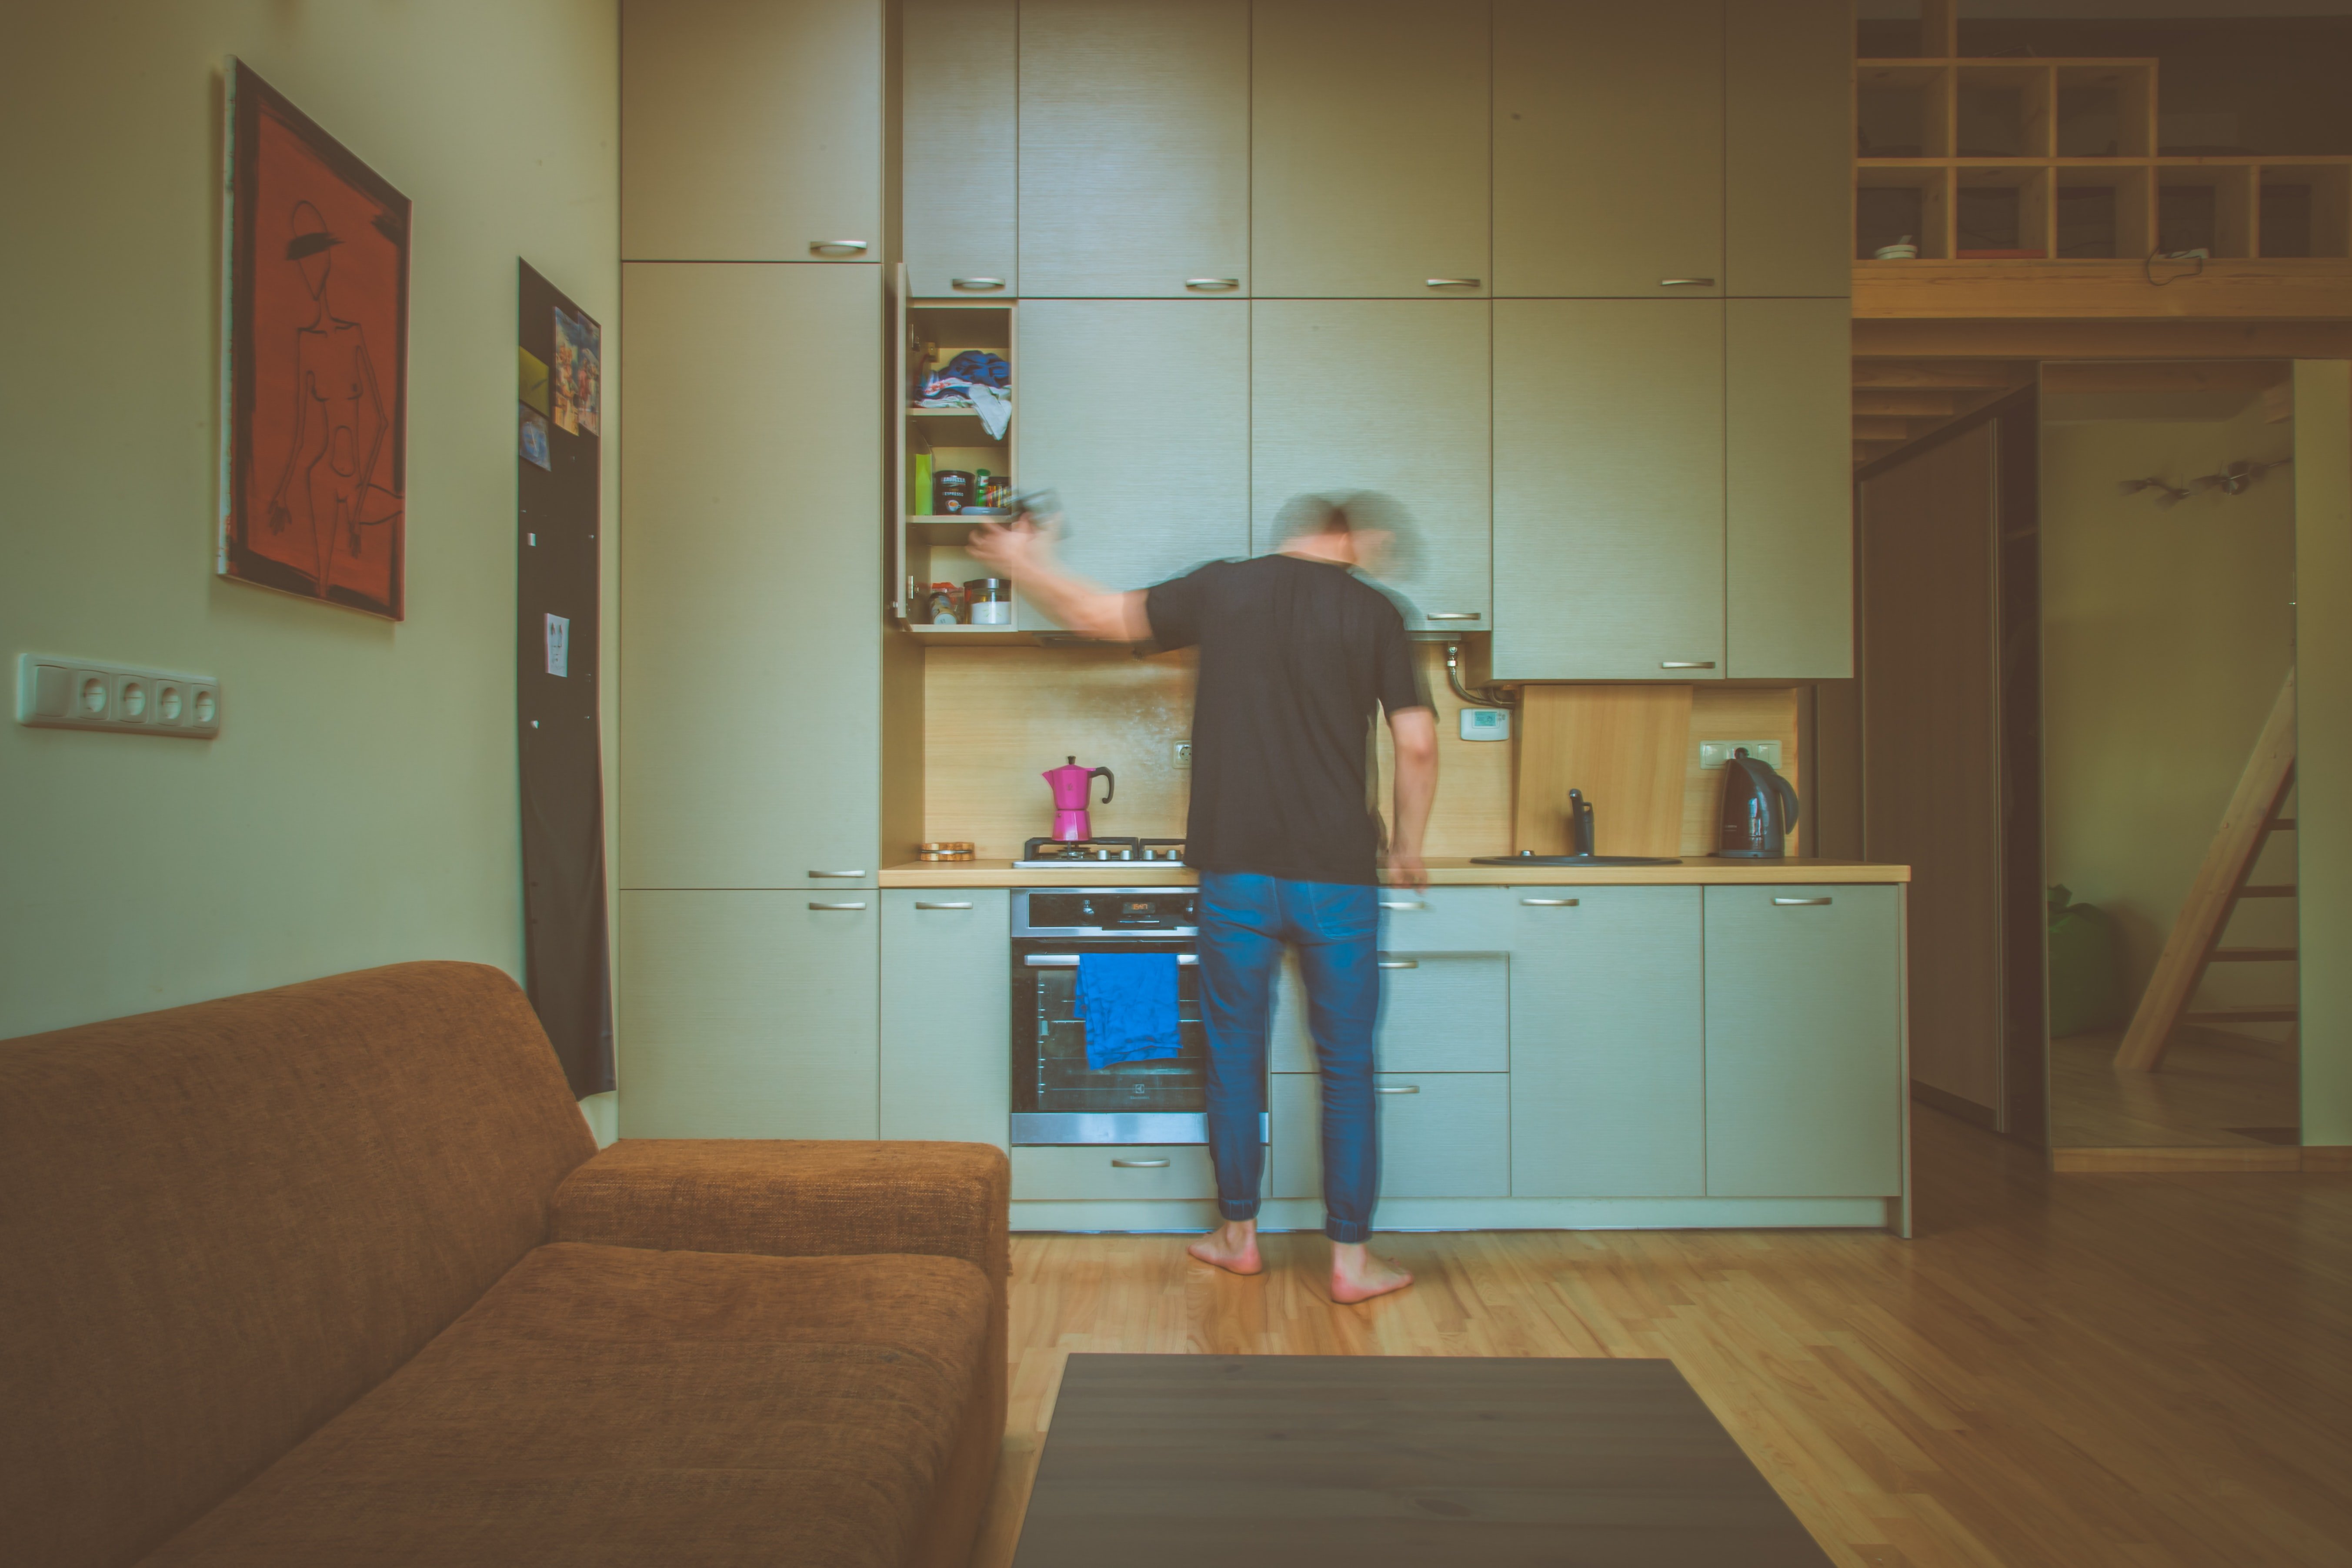 OP goes to the kitchen at 2 a.m. to drink water | Photo: Unsplash